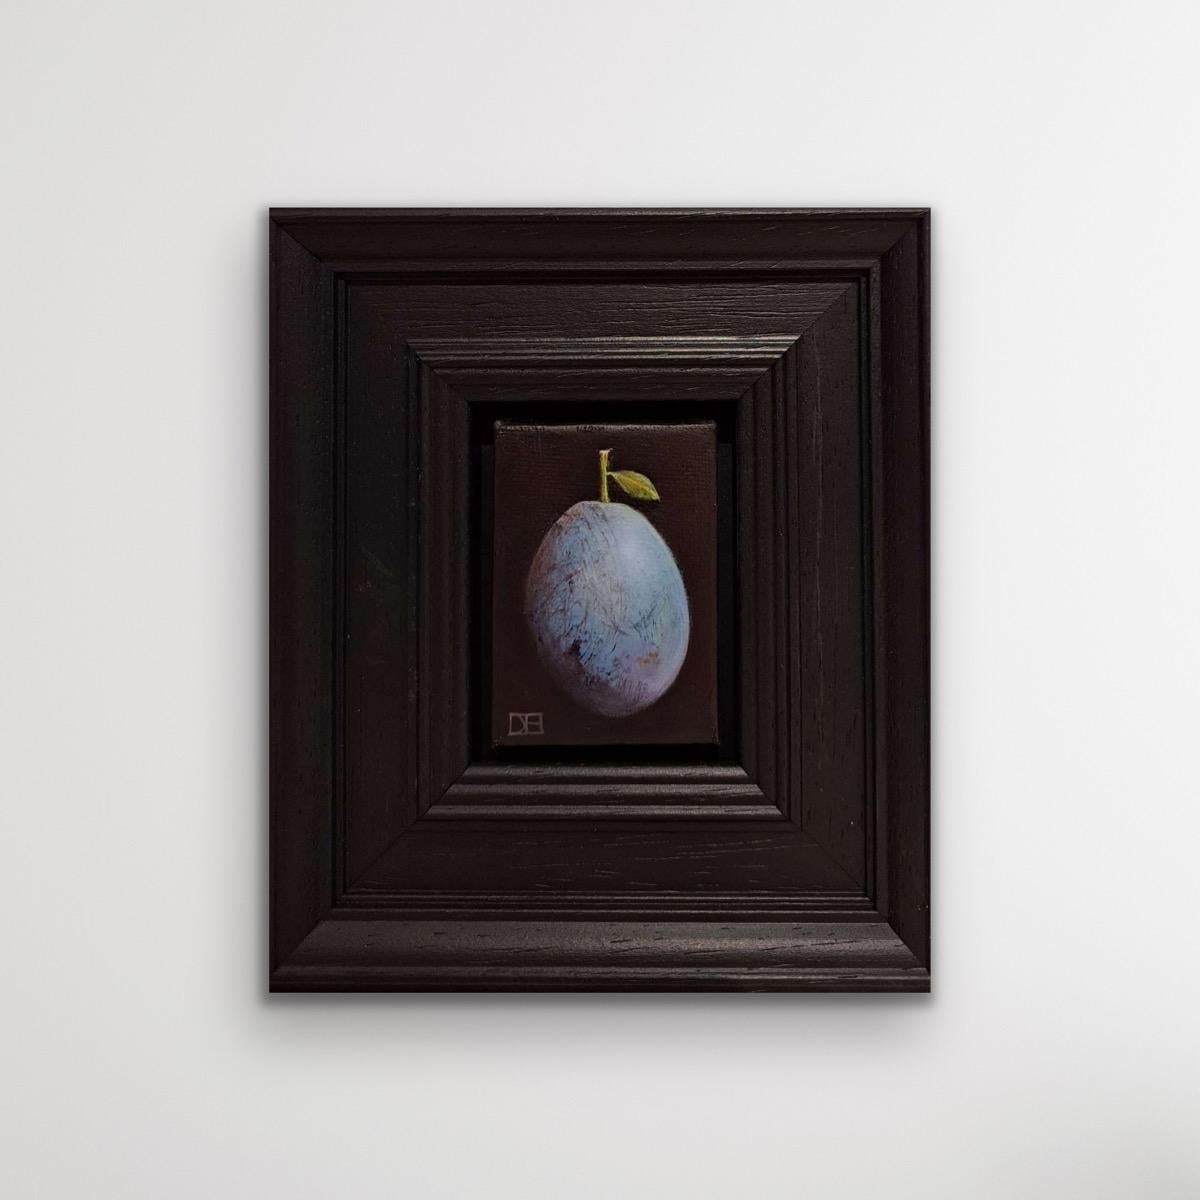 Pocket Blue Grey Damson is an original oil painting by Dani Humberstone as part of her Pocket Painting series featuring small scale realistic oil paintings, with a nod to baroque still life painting. The paintings are set in a black wood layered